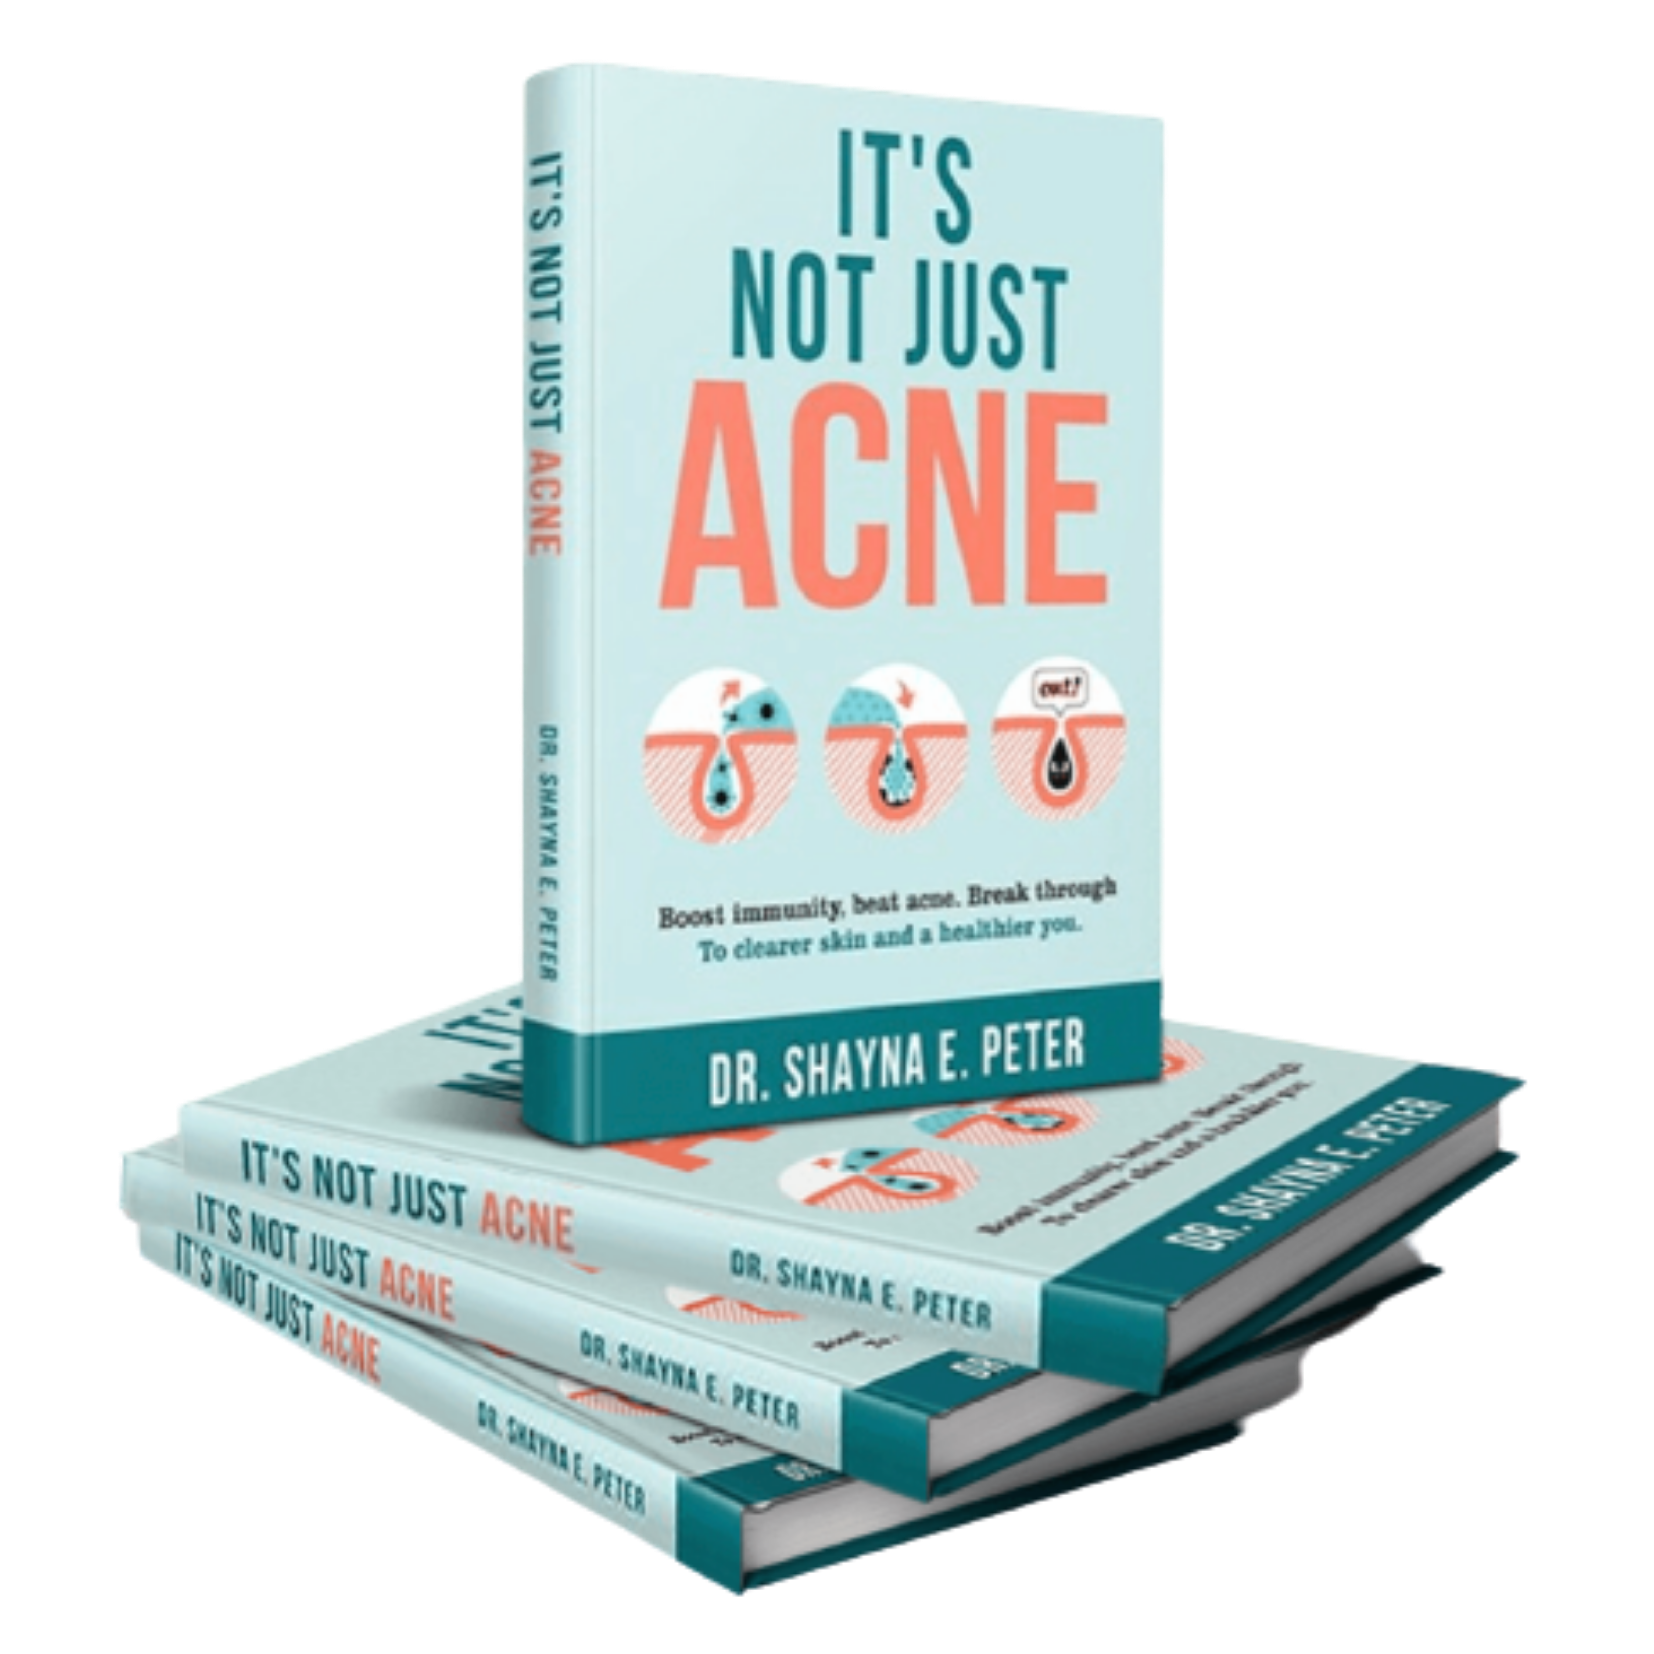 It's Not Just Acne